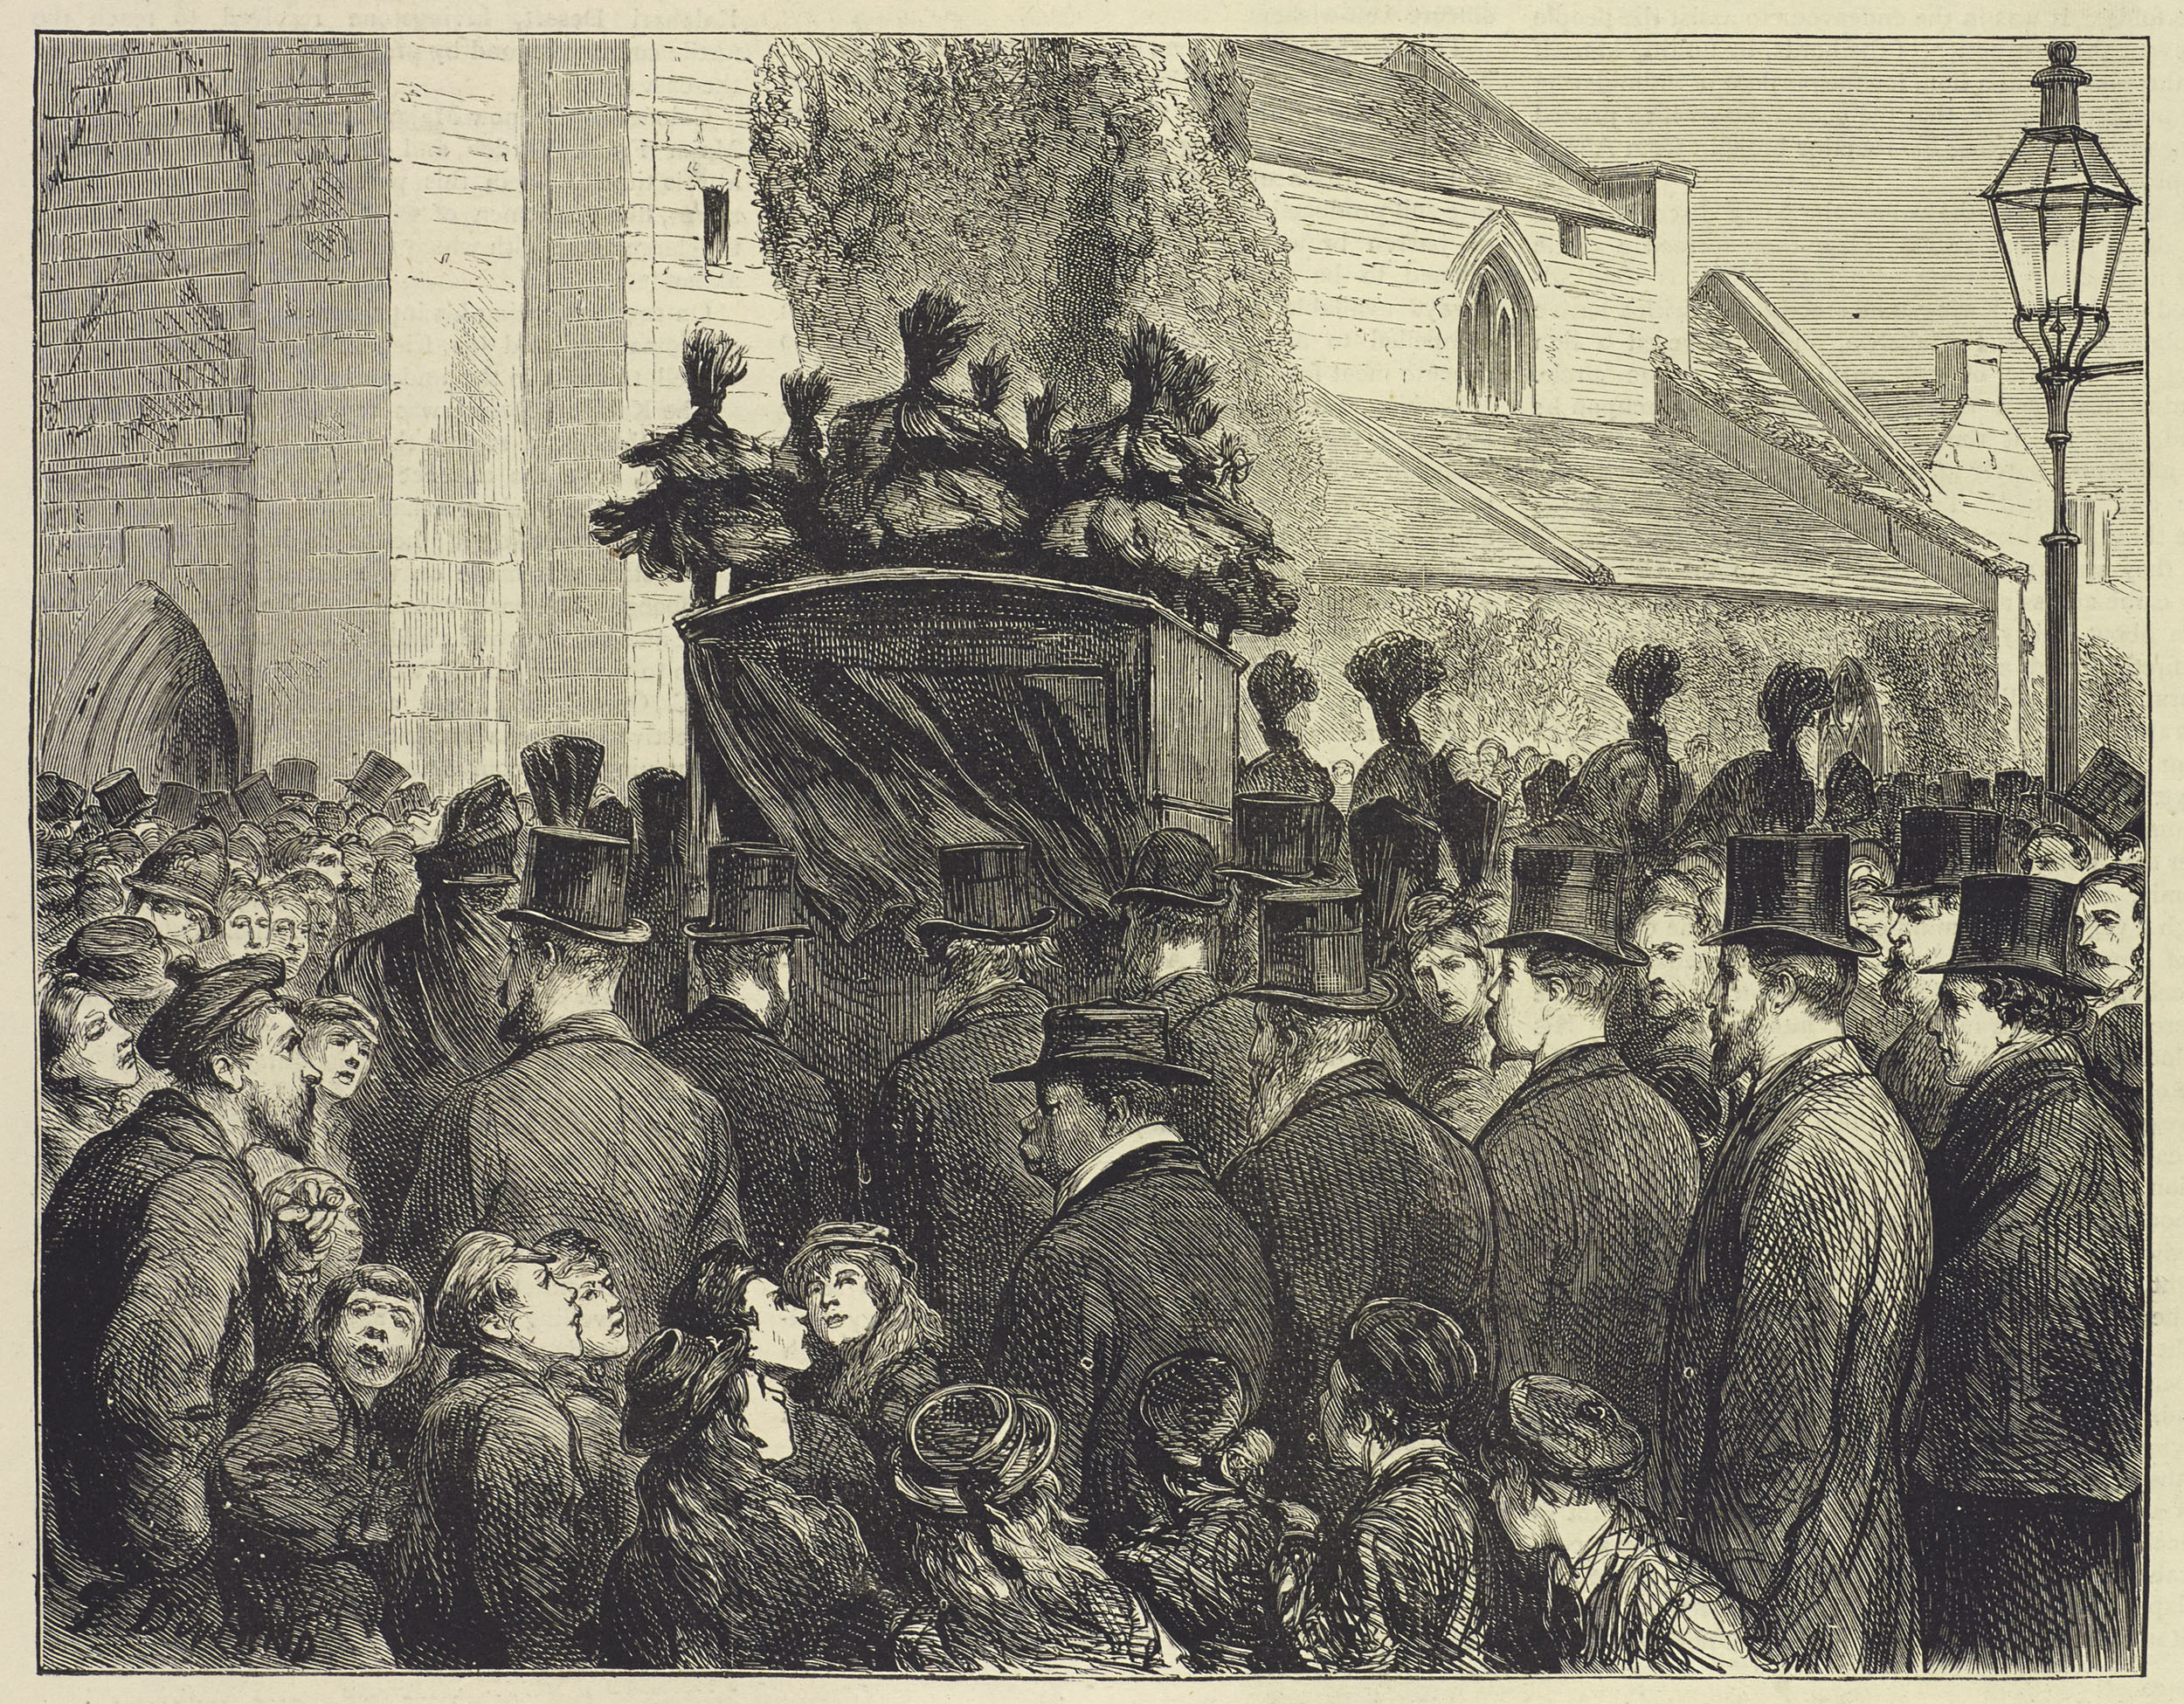 The Procession Passing Through the Streets of Southampton. Illustration from 'The Life and Labours of David Livingstone' (Stanley 1874:396). Copyright National Library of Scotland. Creative Commons Share-alike 2.5 UK: Scotland (https://creativecommons.org/licenses/by-nc-sa/2.5/scotland/).